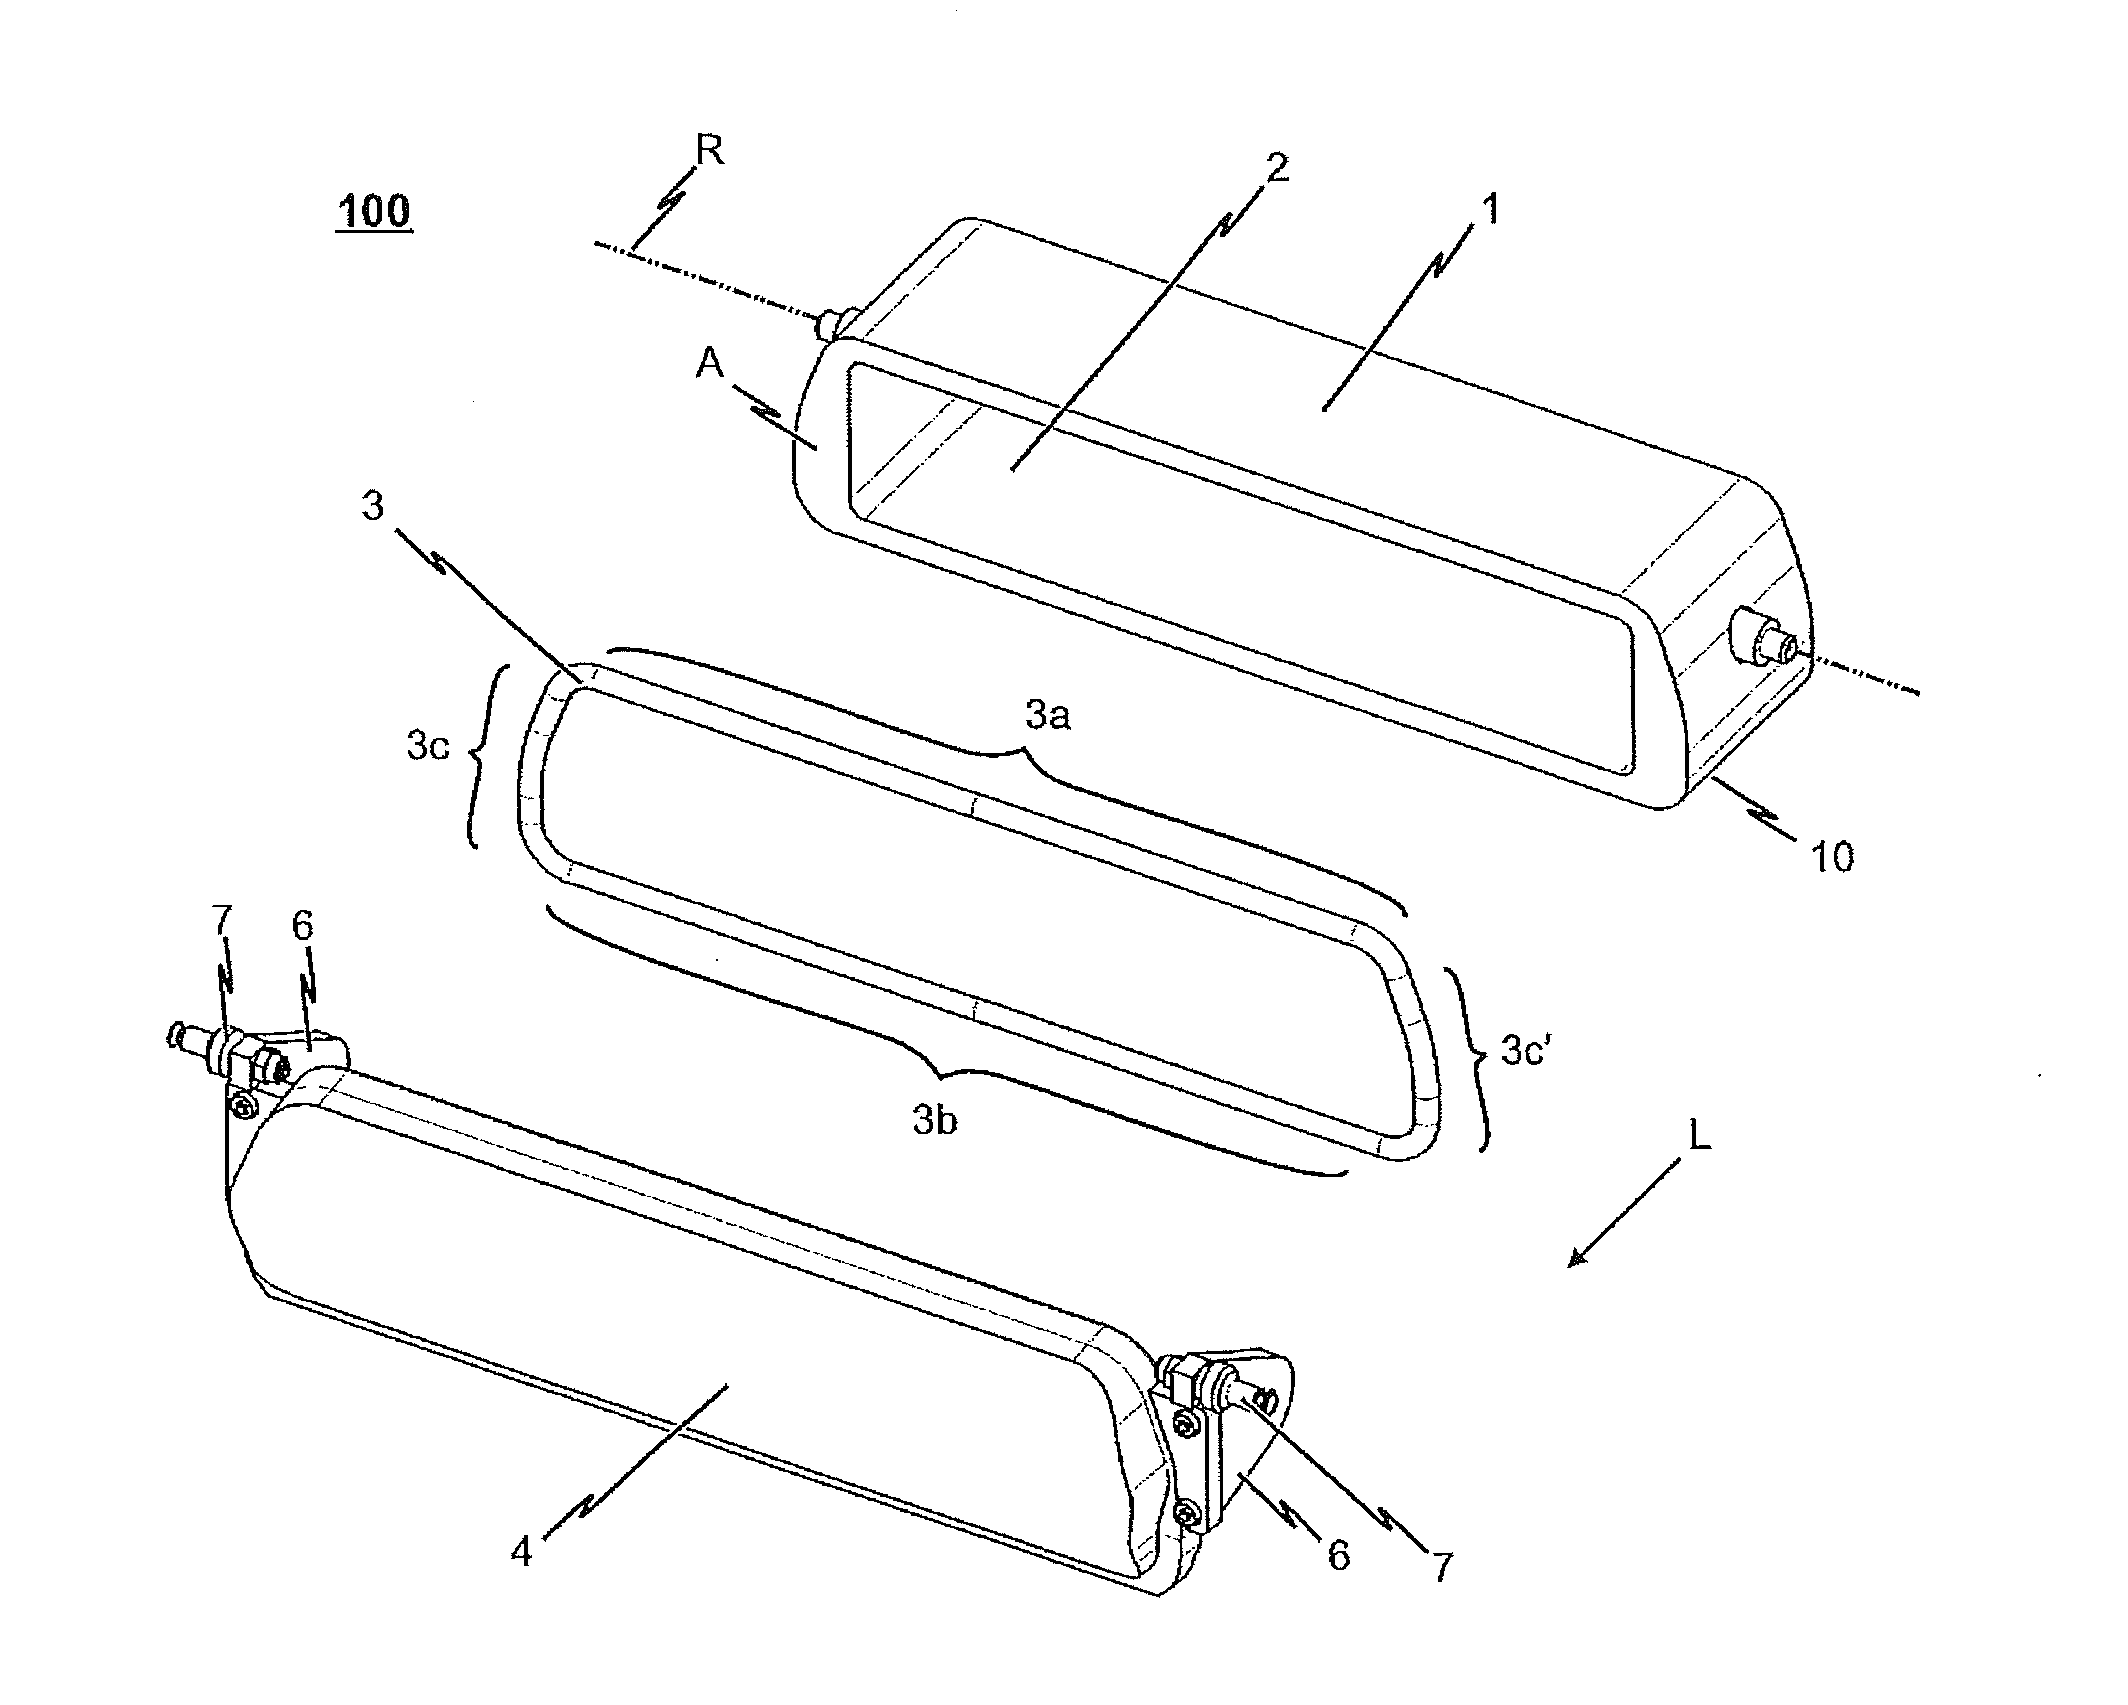 Electrical contact coupling for a track-borne vehicle, particularly a railway vehicle